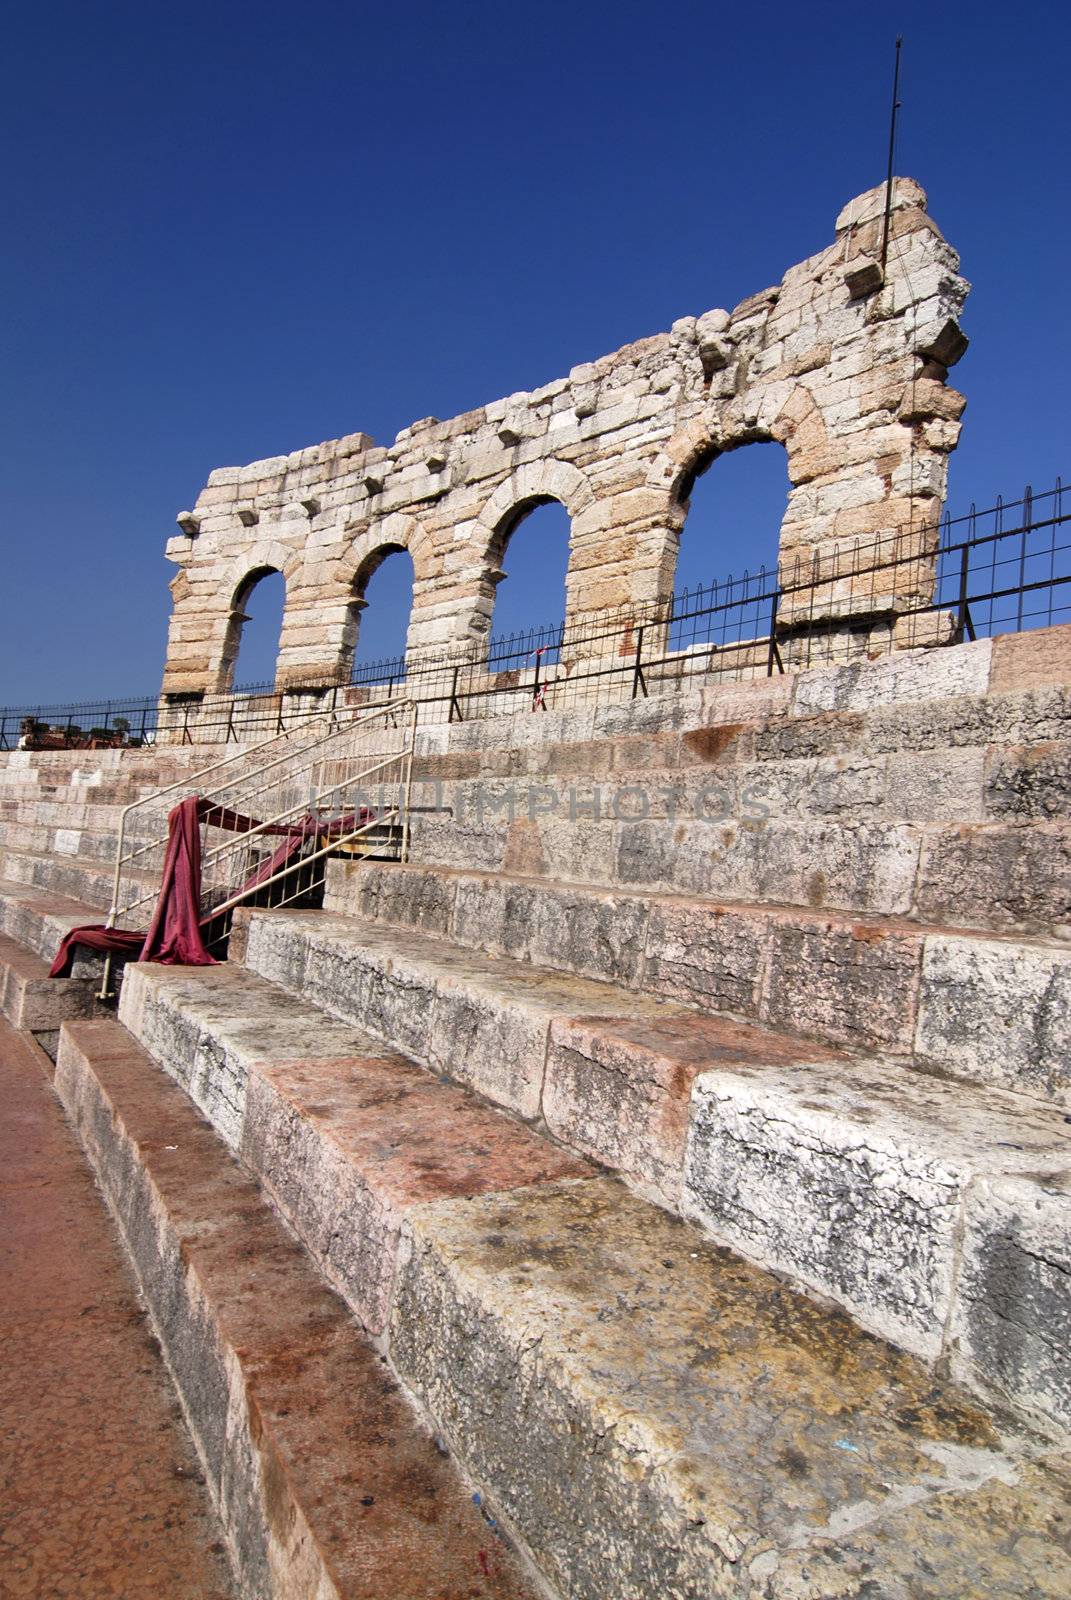 Arena in Verona by fyletto